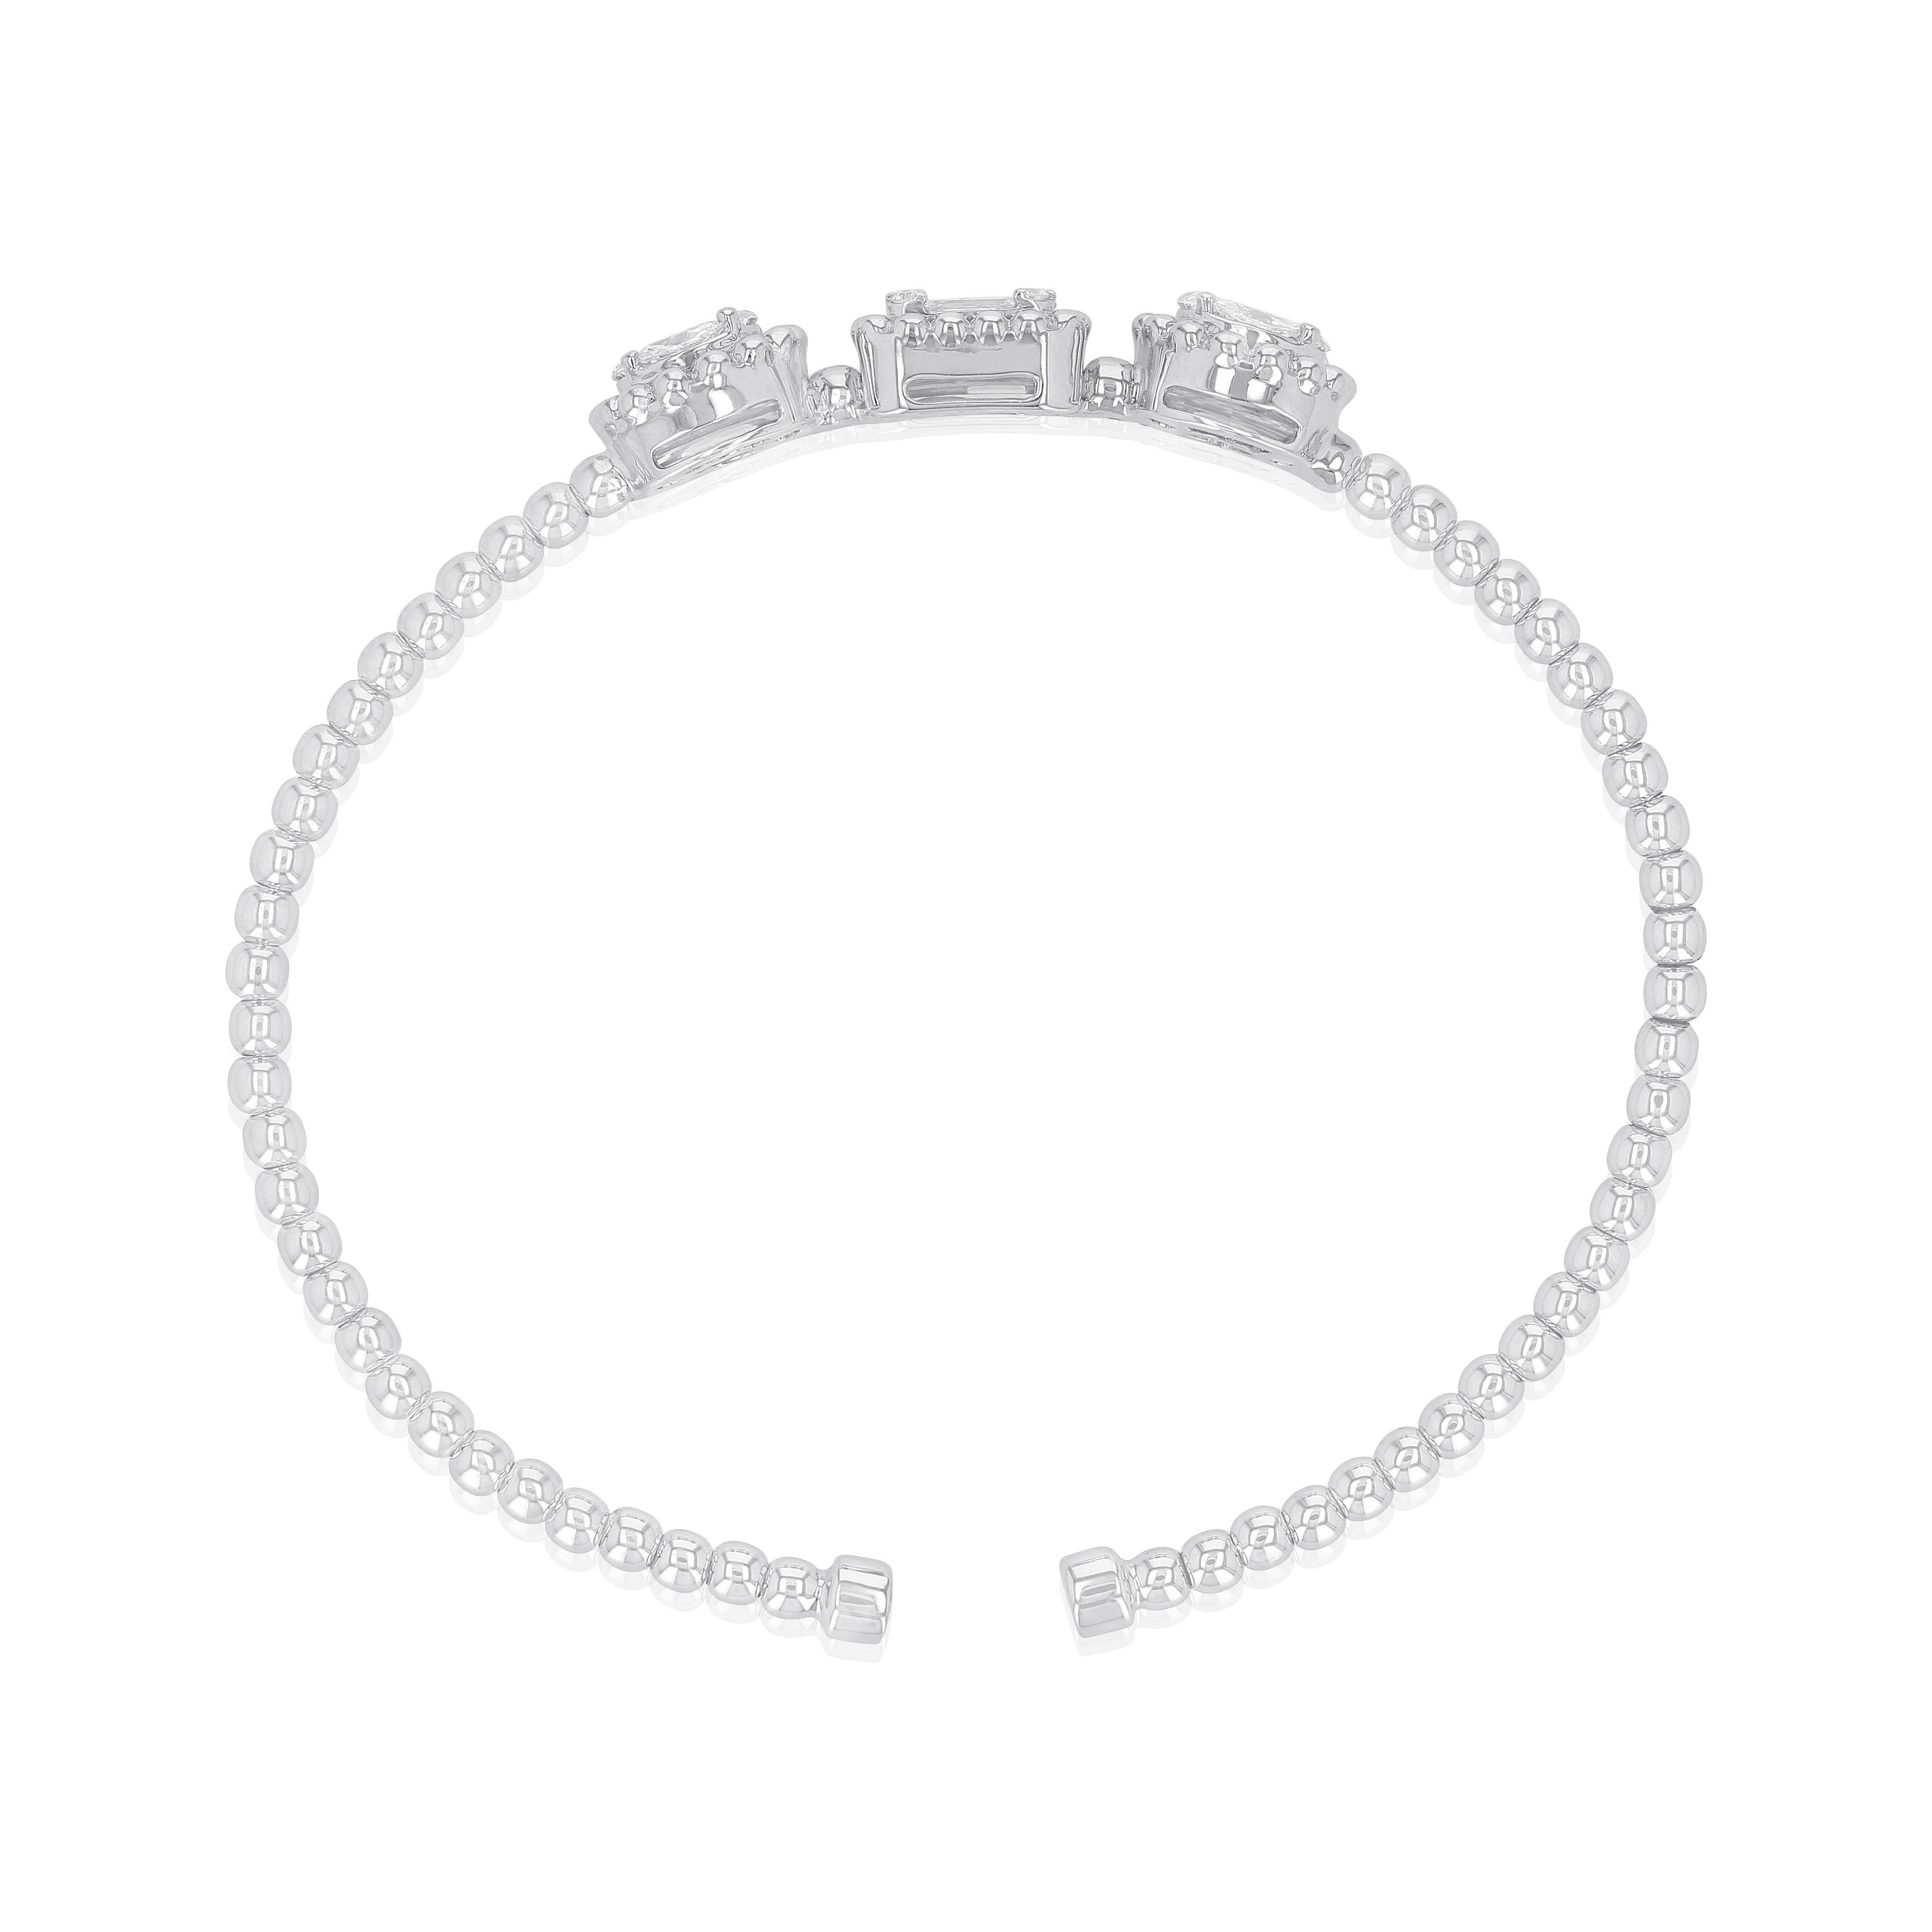 Showcasing the beauty of different diamond cuts, a graceful bracelet set with 3 remarkable portions of round and baguette cut diamonds that whirl endlessly around the wrist forming form the centre piece of this 18 karat white gold and diamond